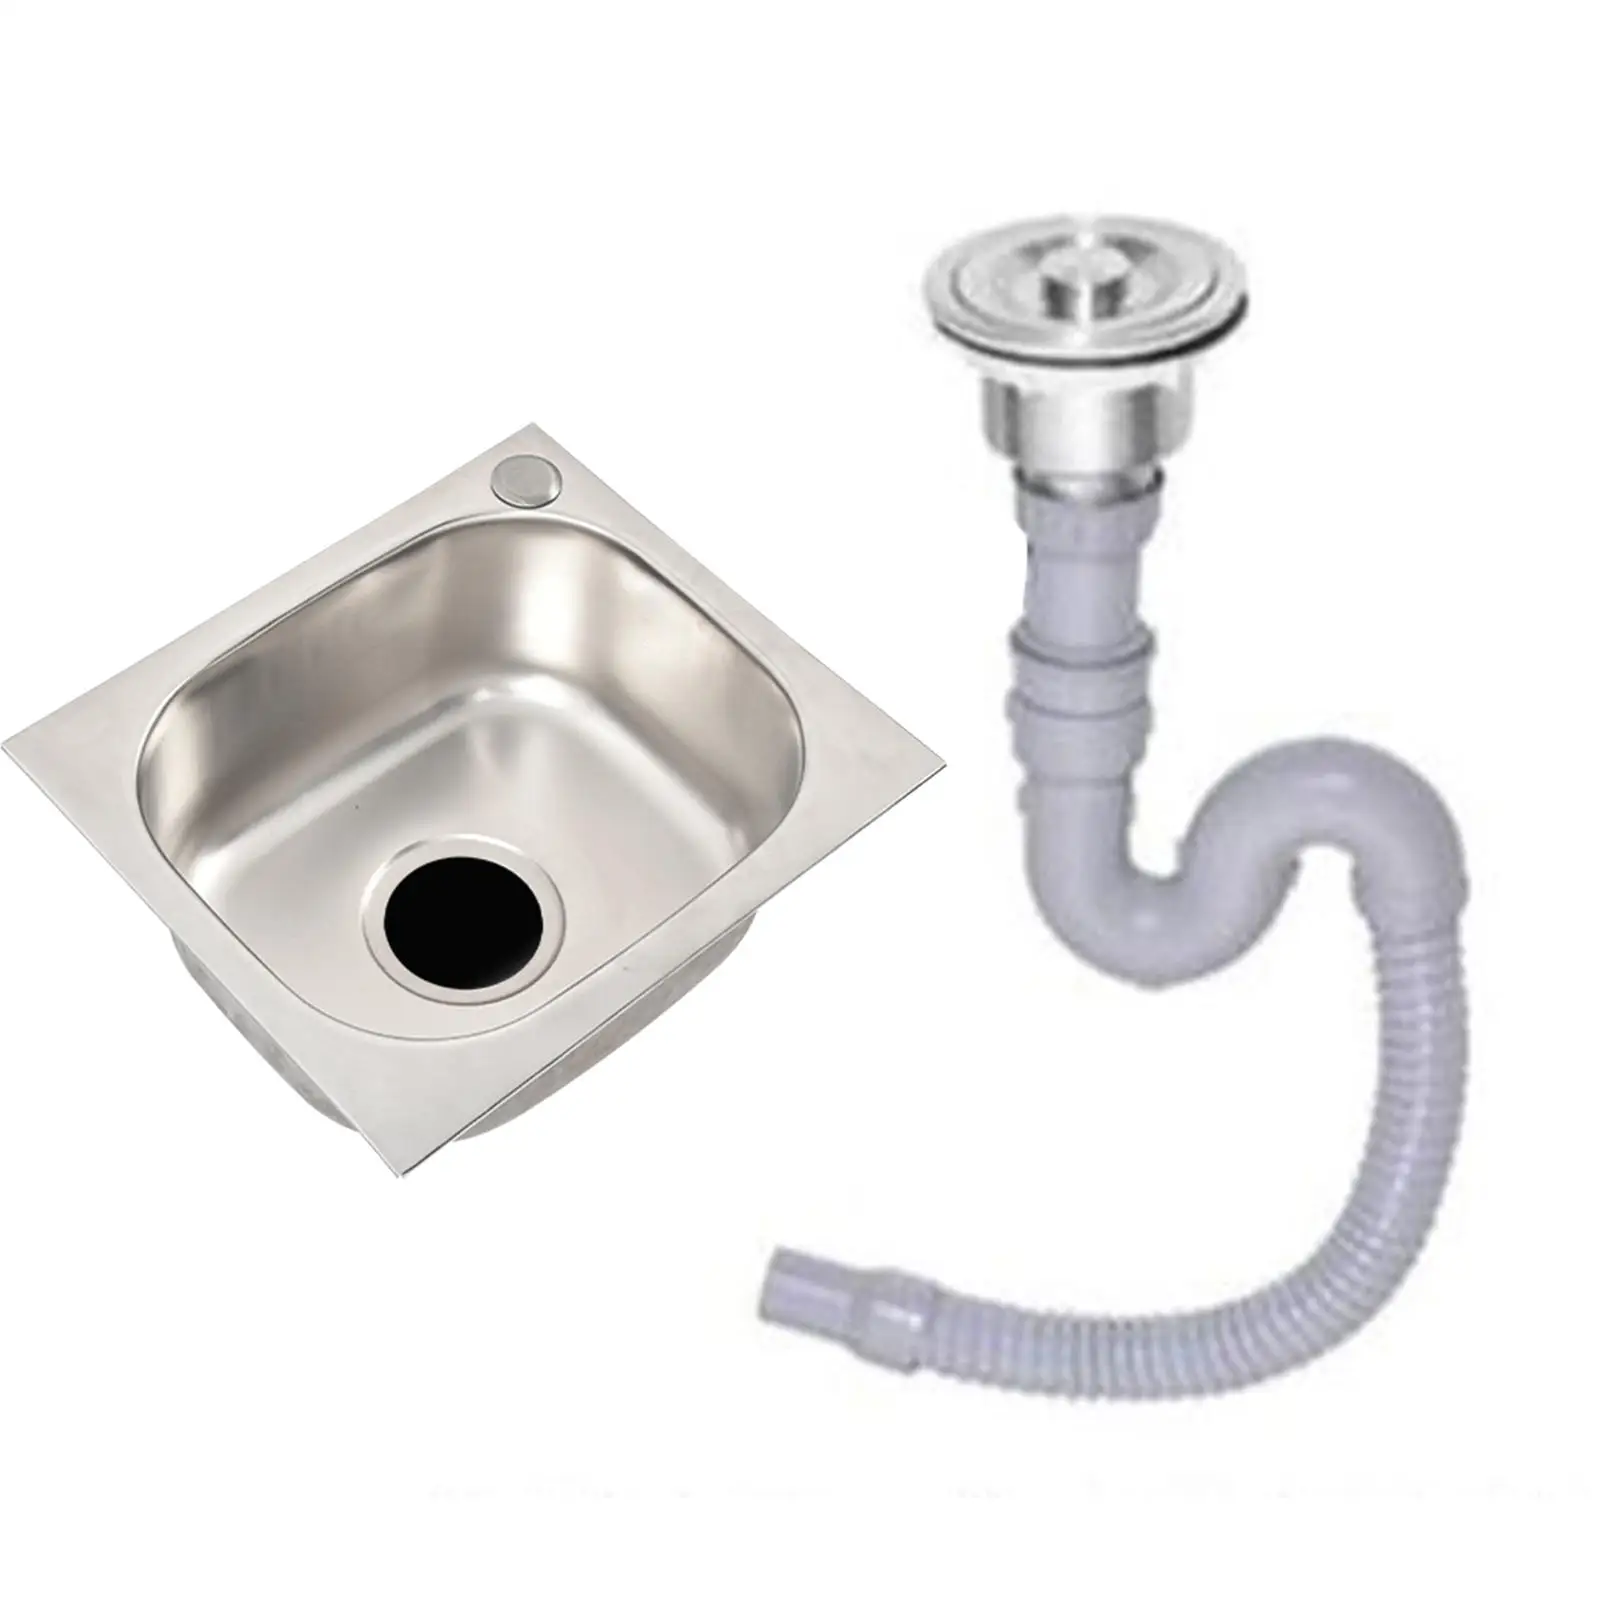 Topmount Kitchen Sink 37cmx32cmx14cm Heavy Duty Fast Drainage with Drain Hole Rectangle Rustproof with Water Pipe 5.5